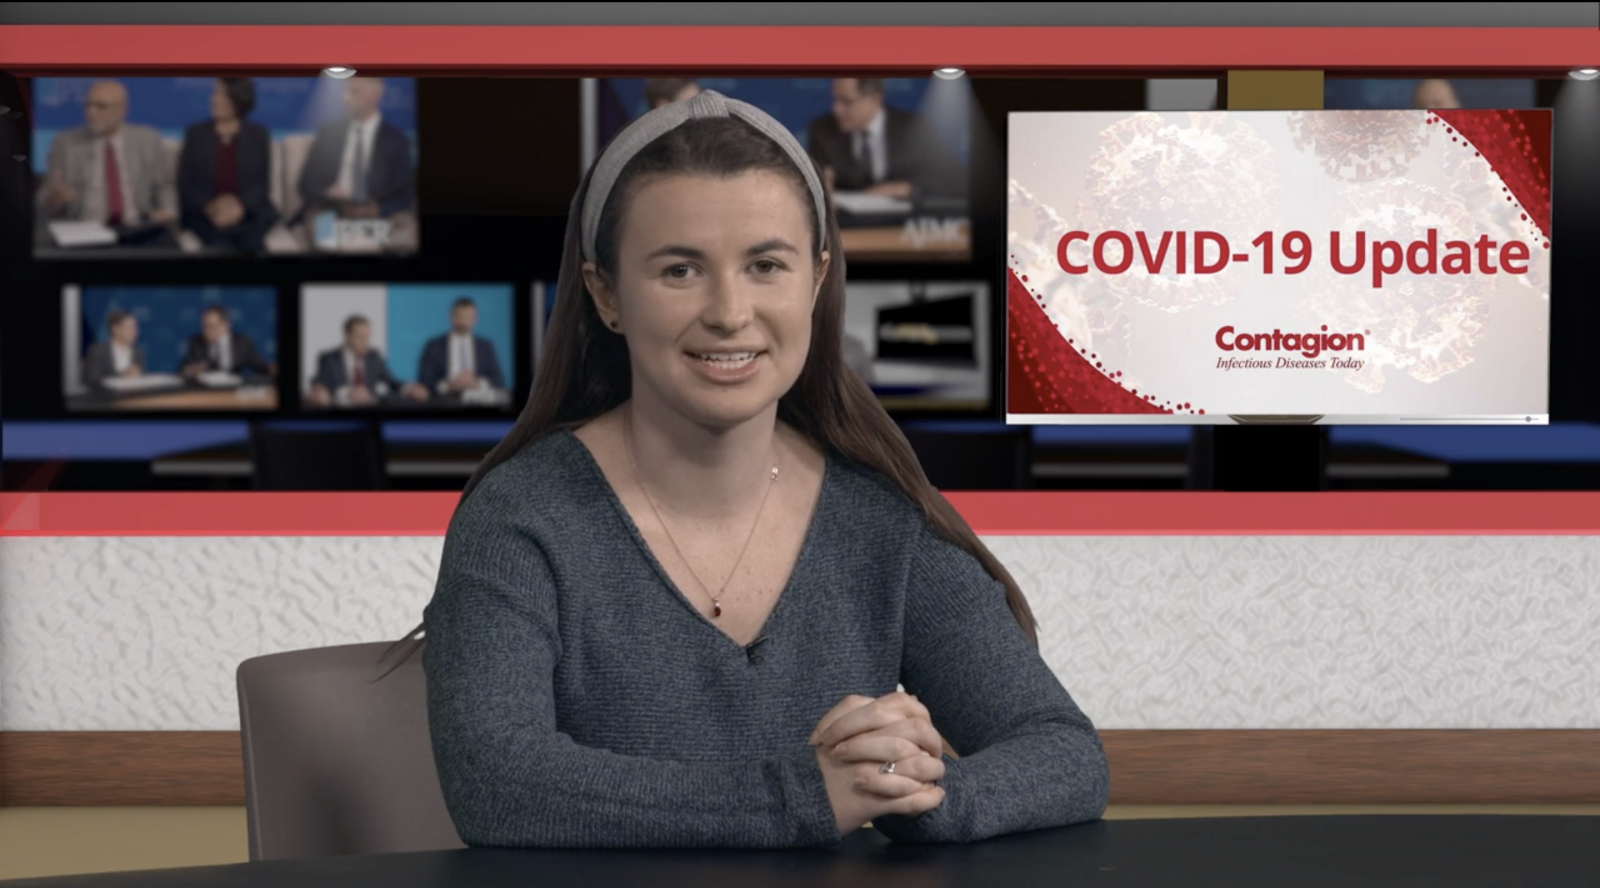 Contagion Live News Network: Coronavirus Updates for March 13, 2020